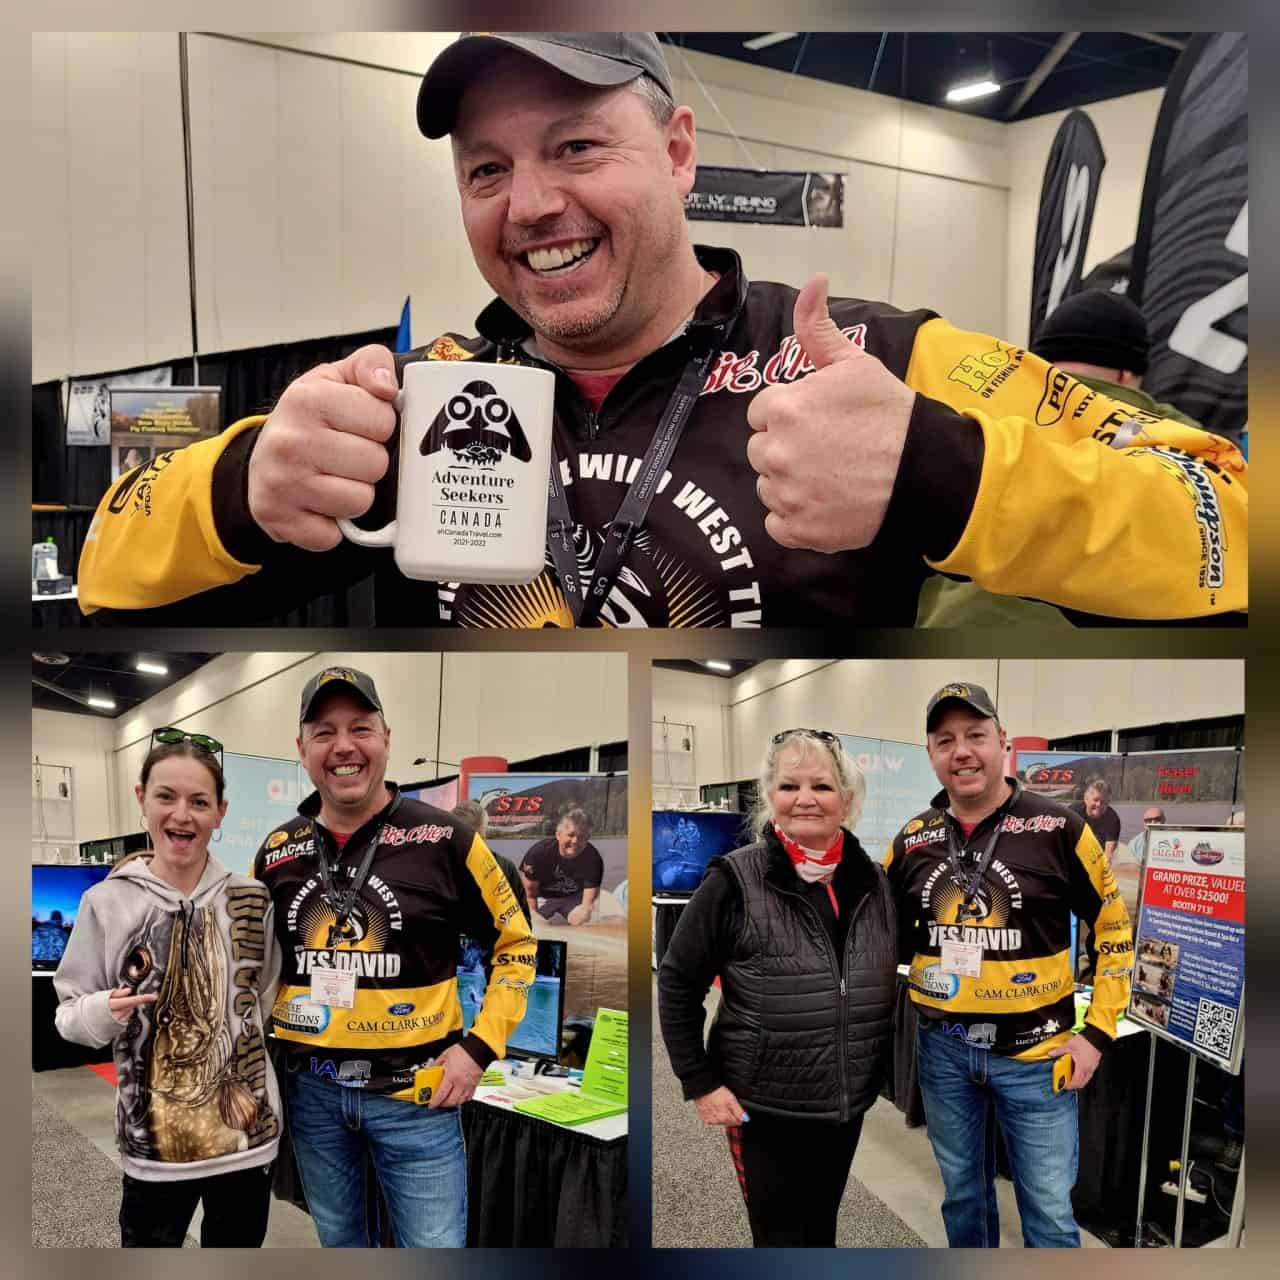 Adventure Seekers Andrea & Cary Horning with Wes David at Calgary Boat & Outdoors Show 2023